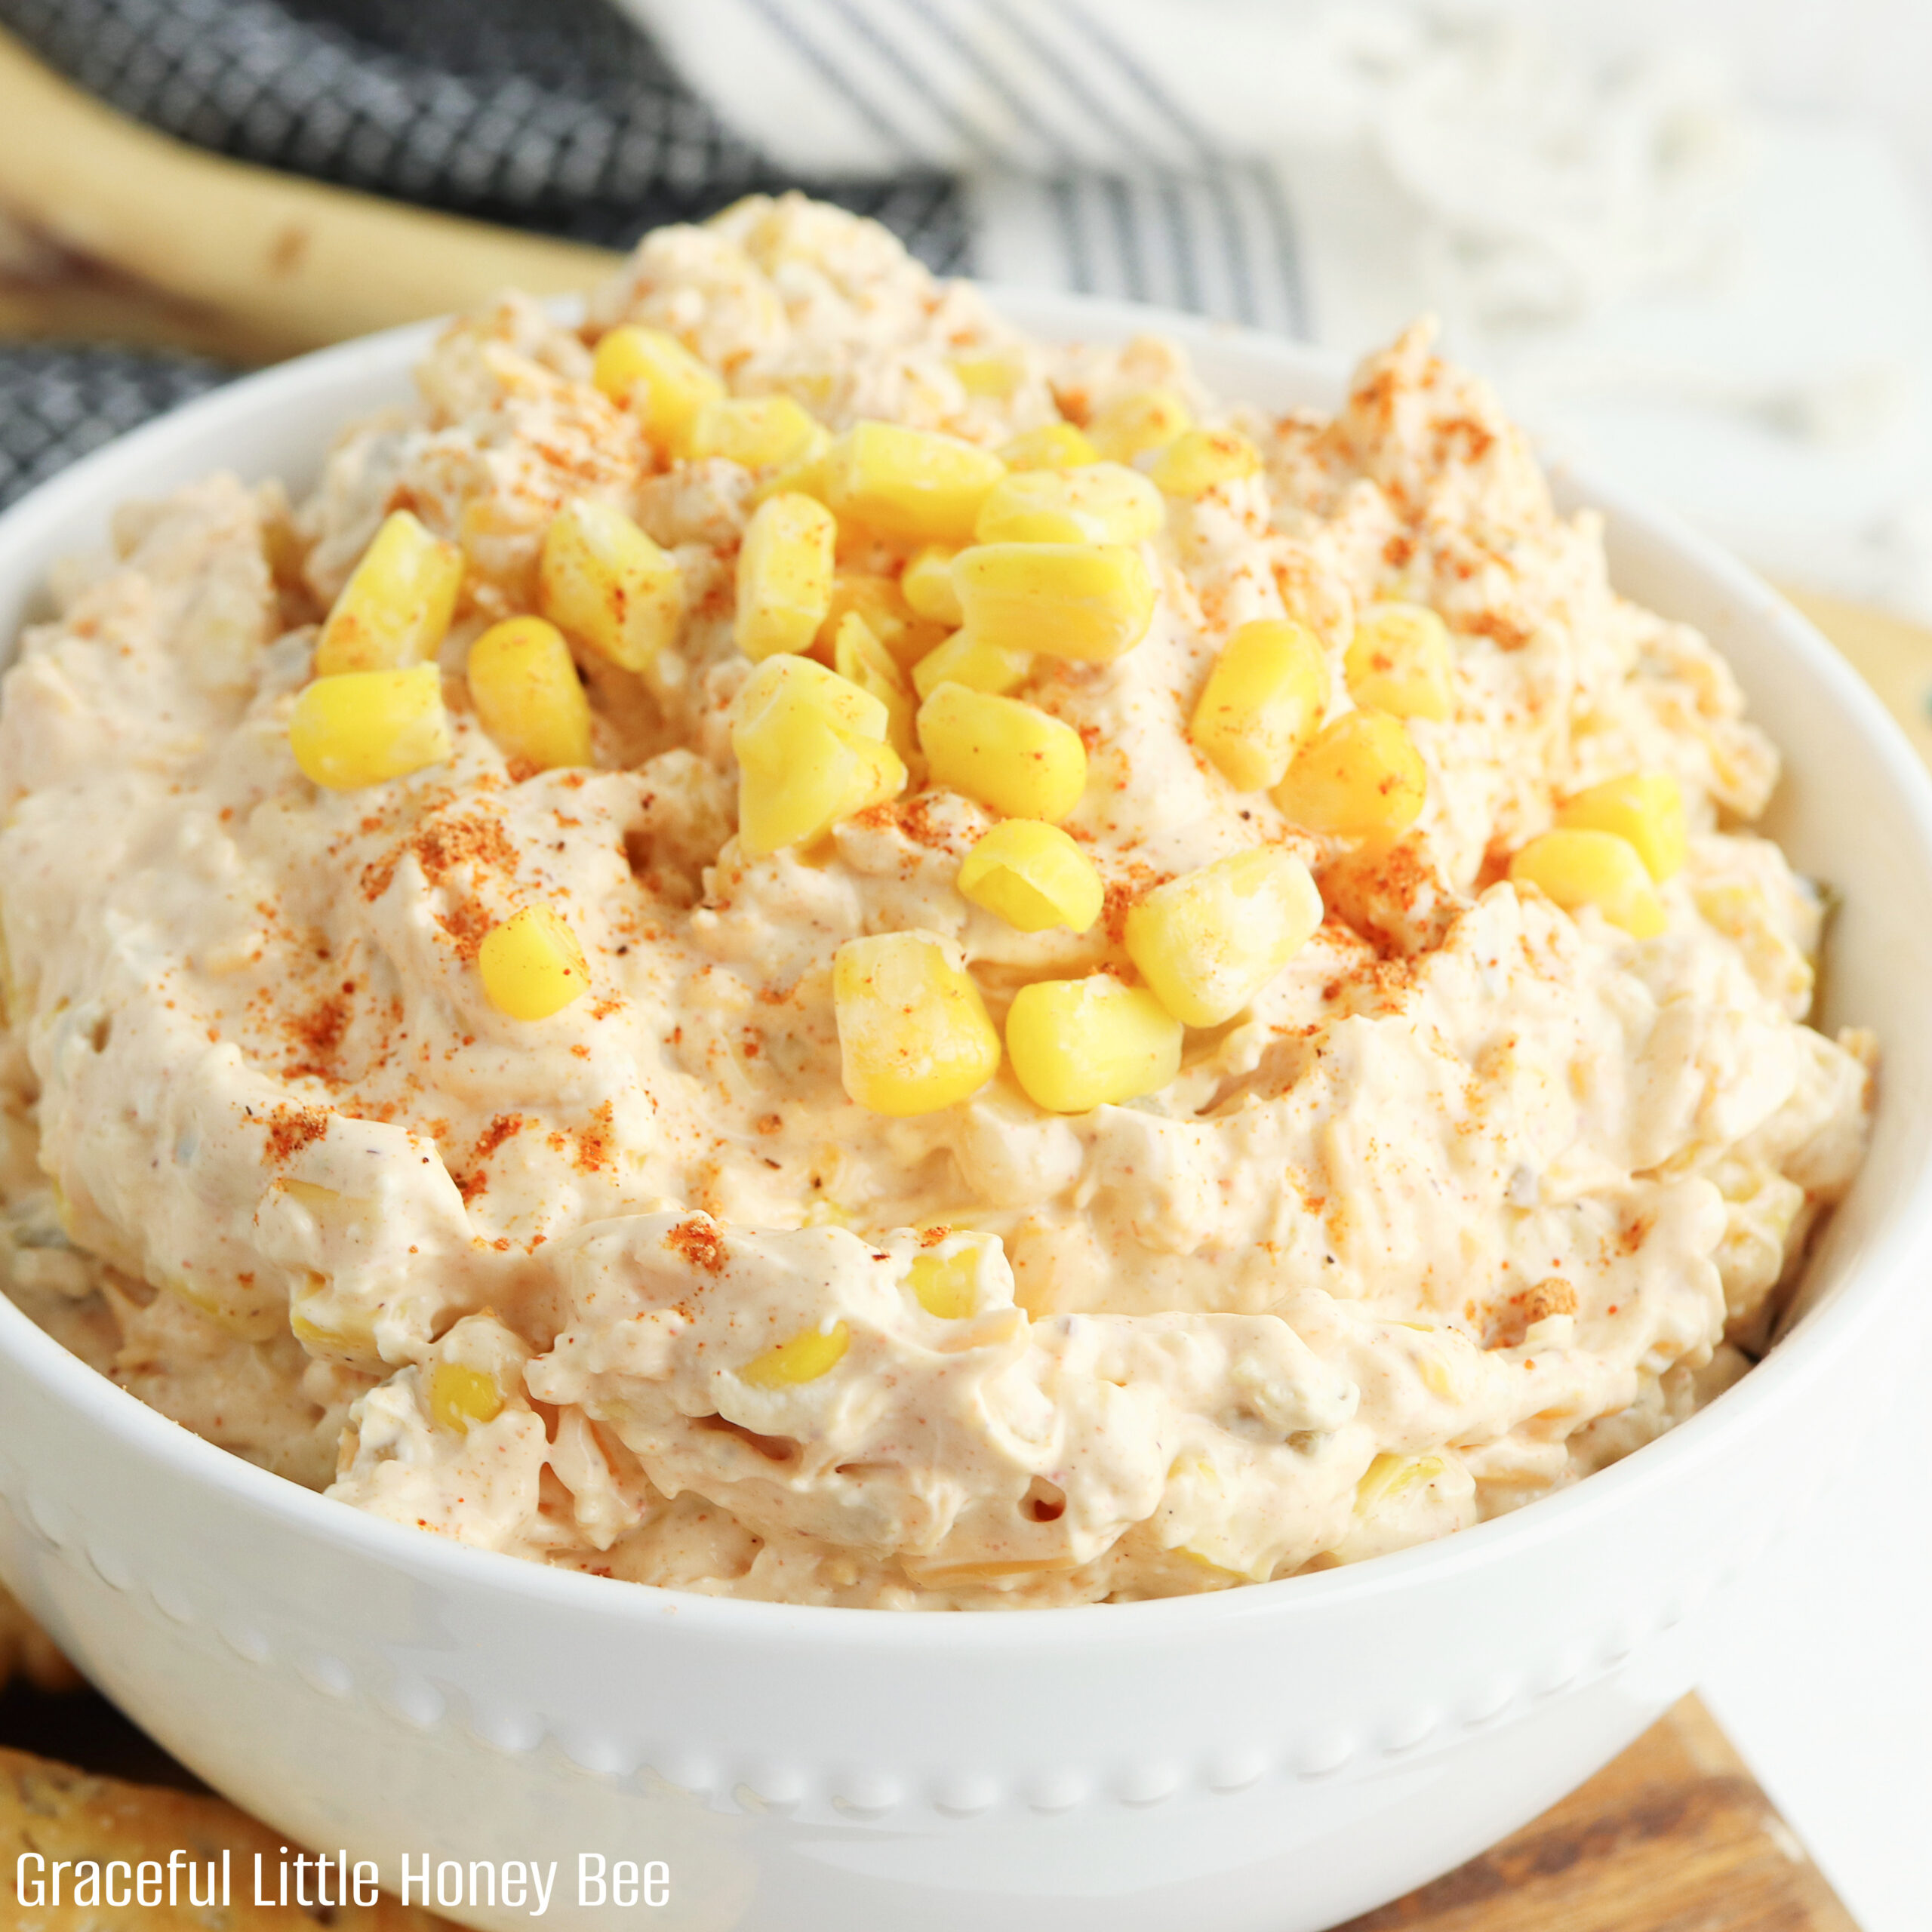 A close up view of corn dip with corn kernels on top for garnish in a white bowl.